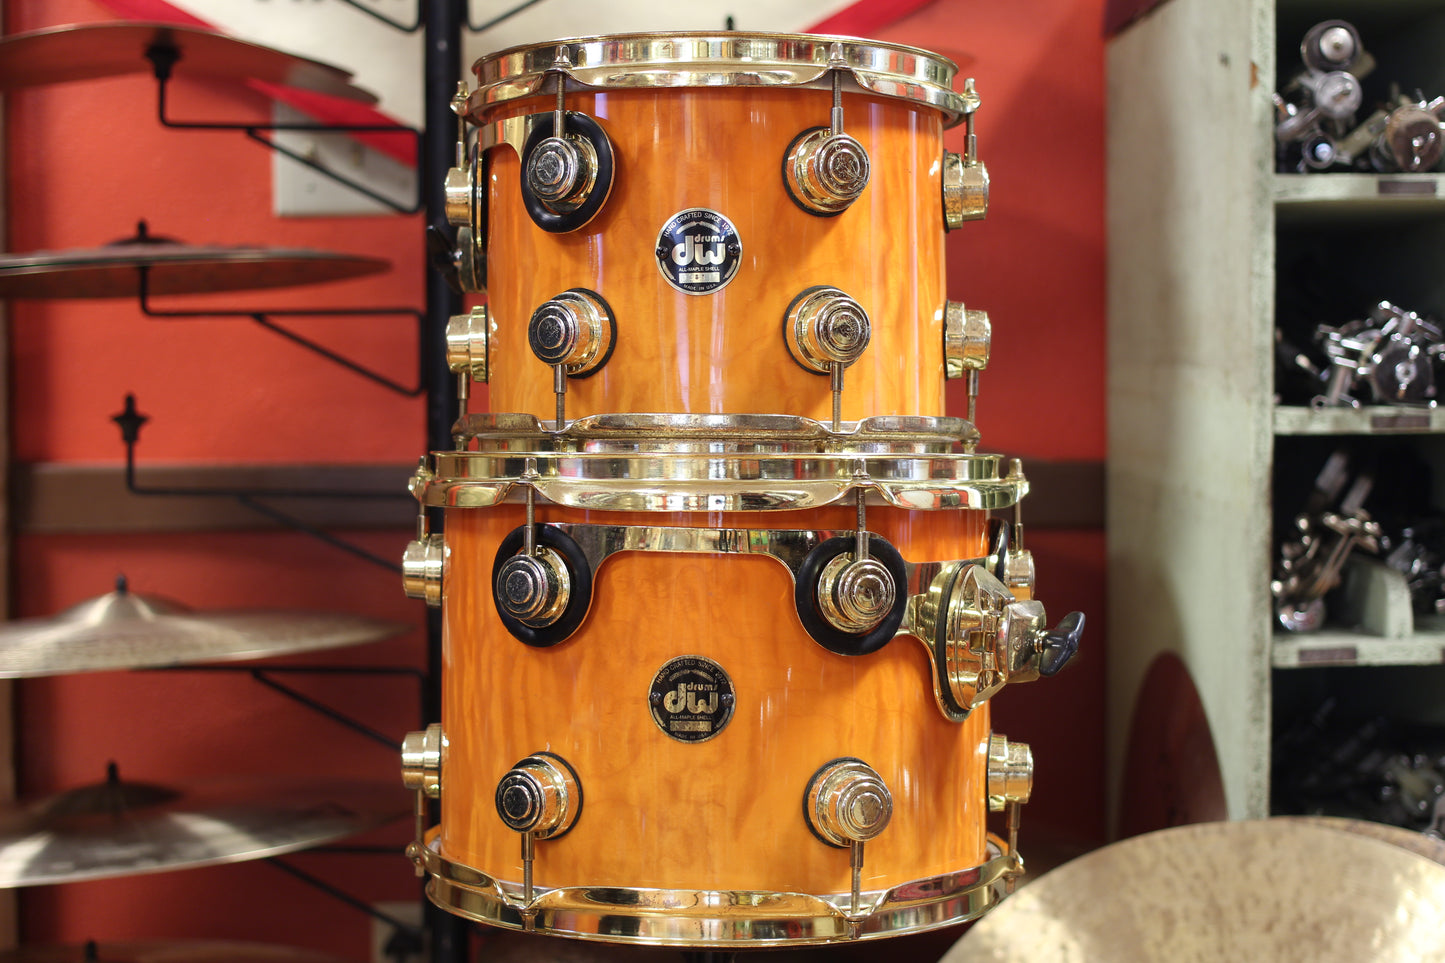 2000 DW Collectors Series in Curly Maple Classic Burst 18x22 13x16 11x14 9x12 8x10